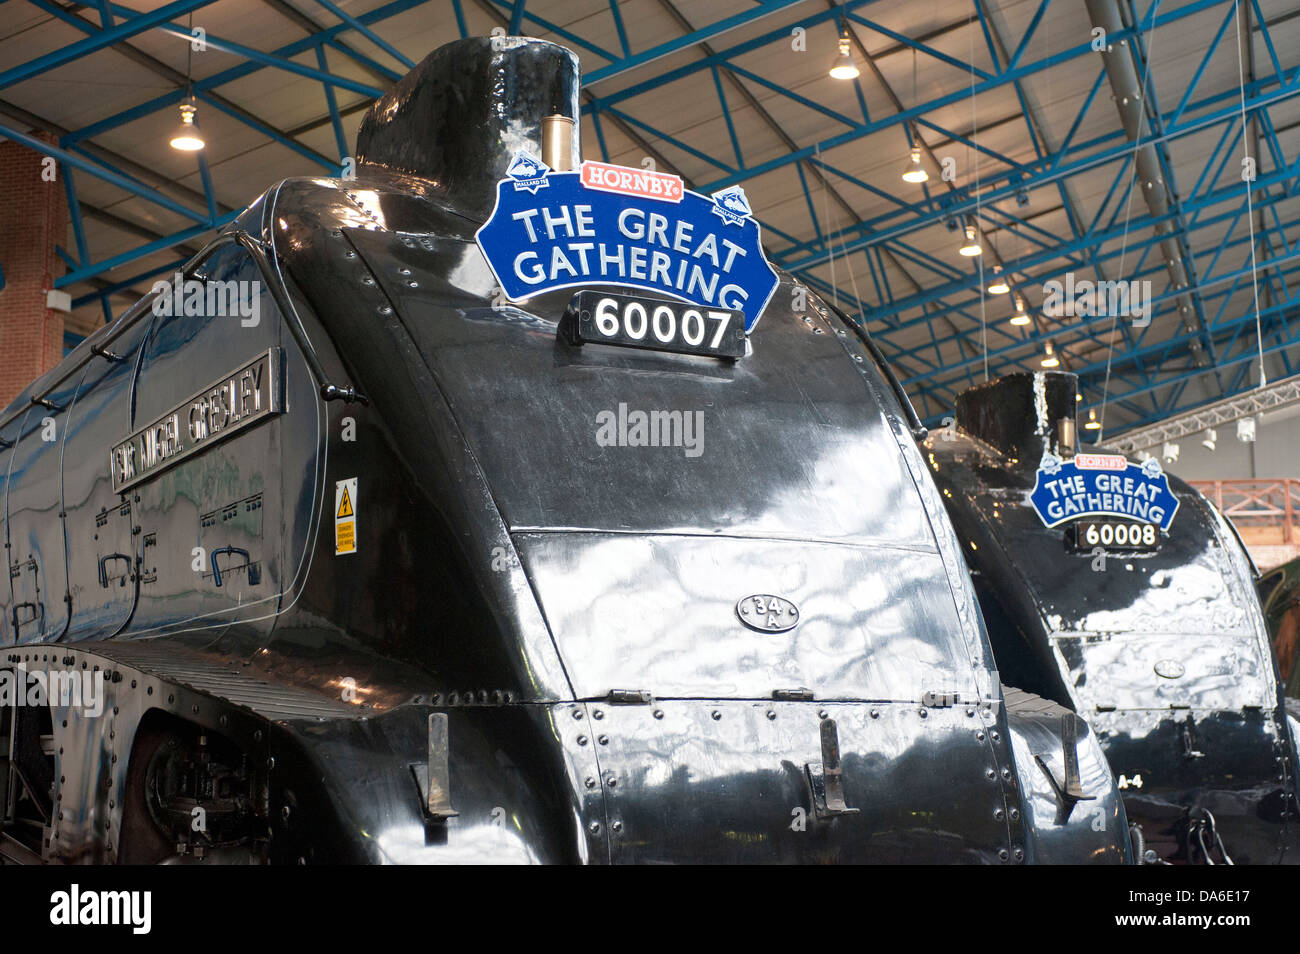 Great Gathering of A4 class steam locomotives at National Railway museum York Stock Photo